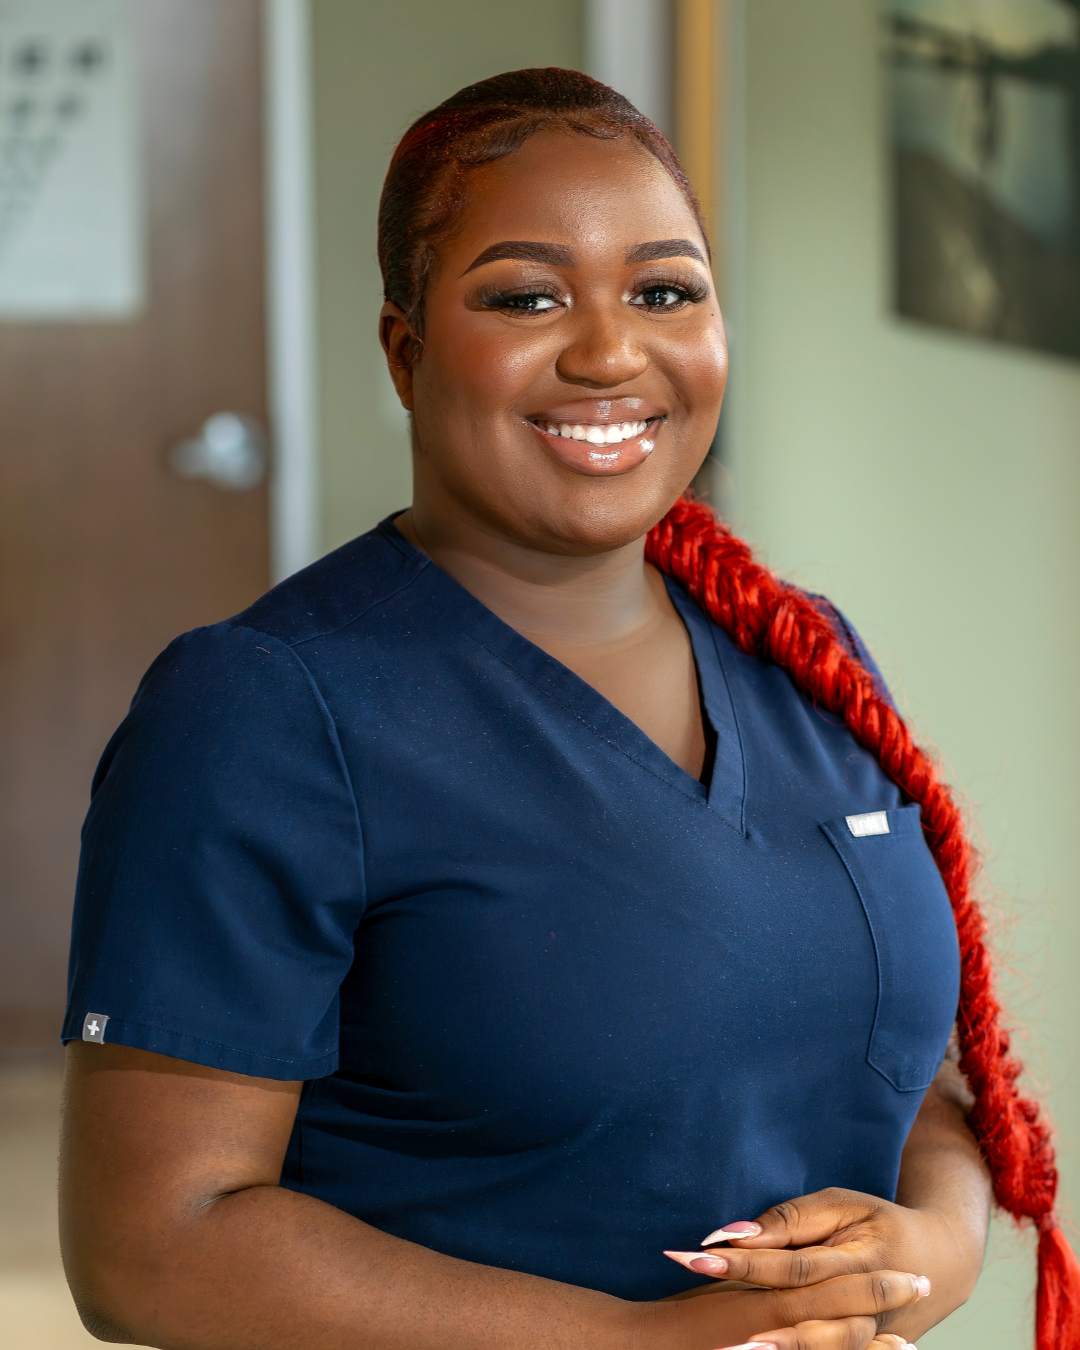 Black woman with red braided hair wearing blue scrubs